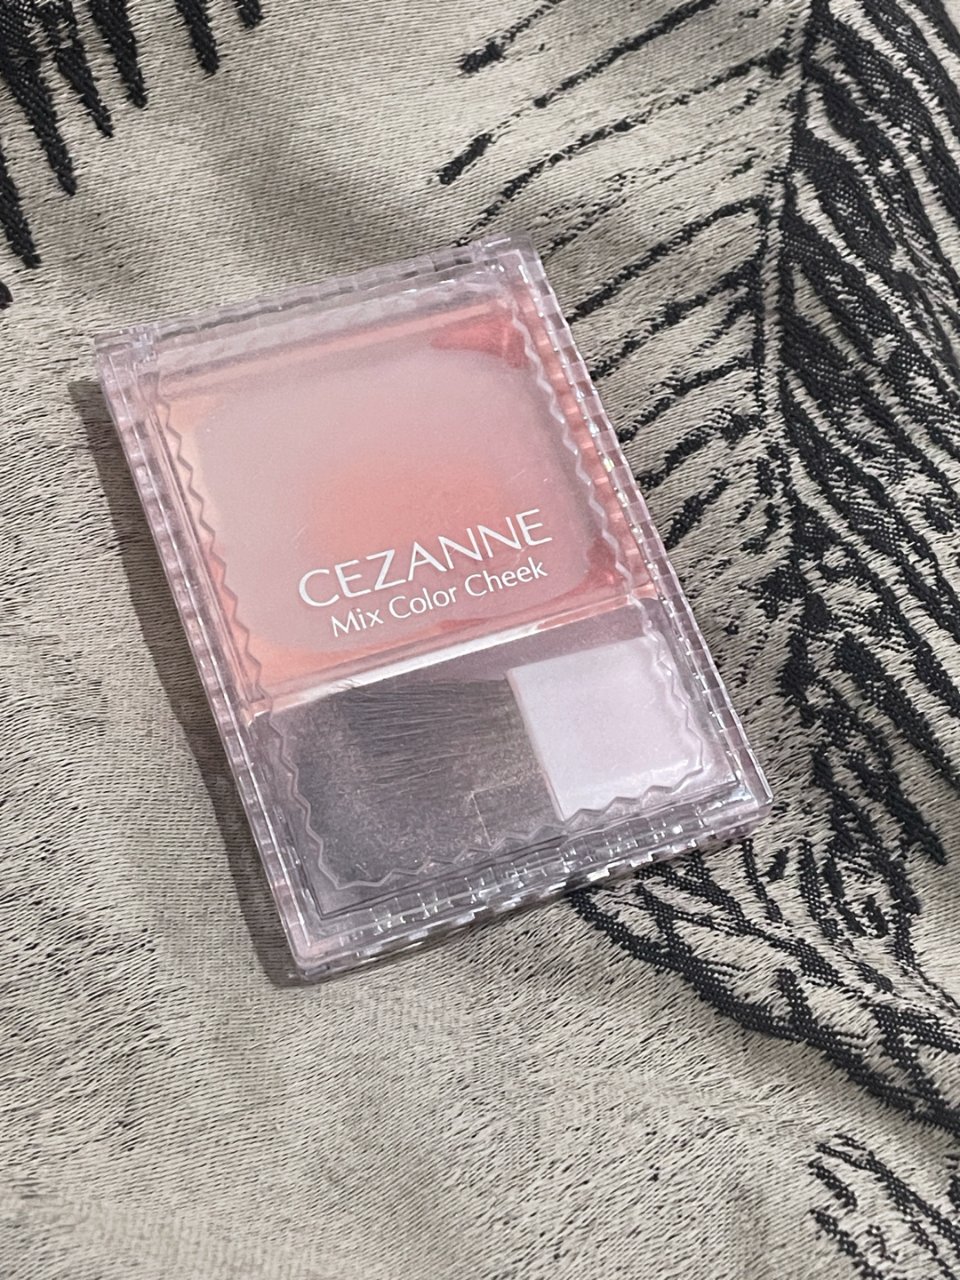 CEZANNE - Mix Color Cheek N | YesStyle